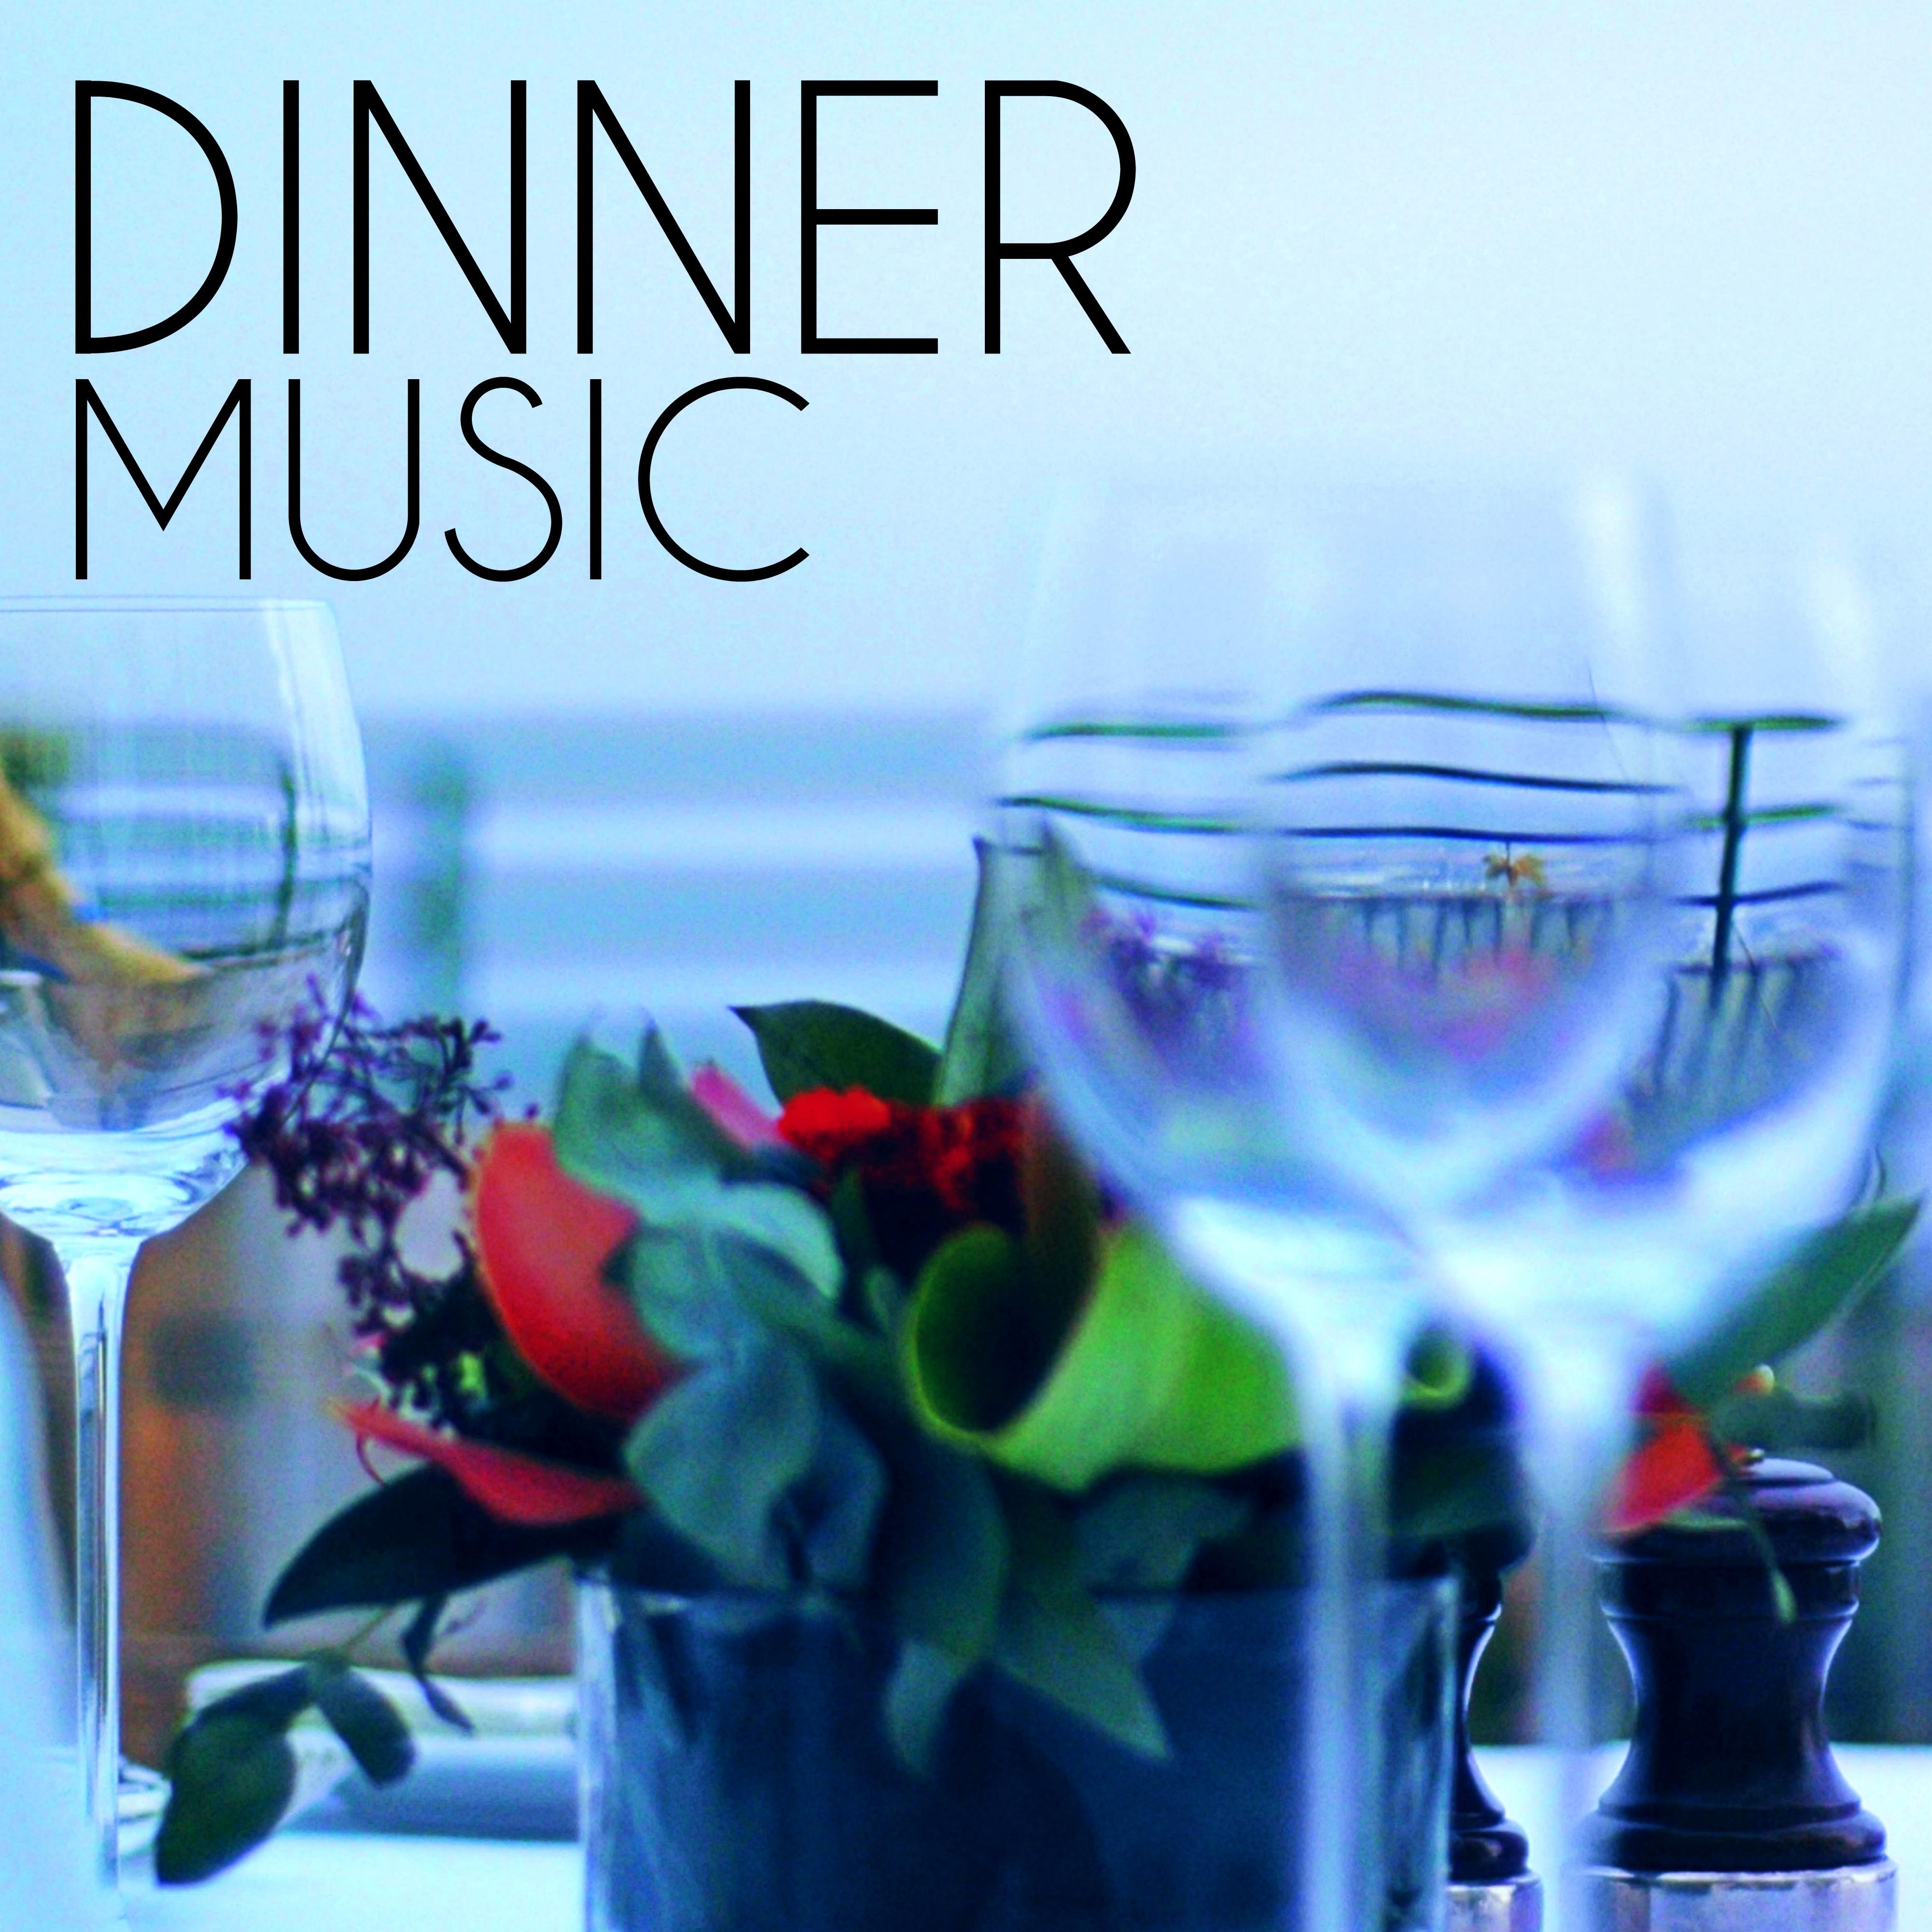 Dinner Music – Big Band Jazz Instrumental, Smooth Jazz & Lounge Music for Cocktail, Drinks and Dinner